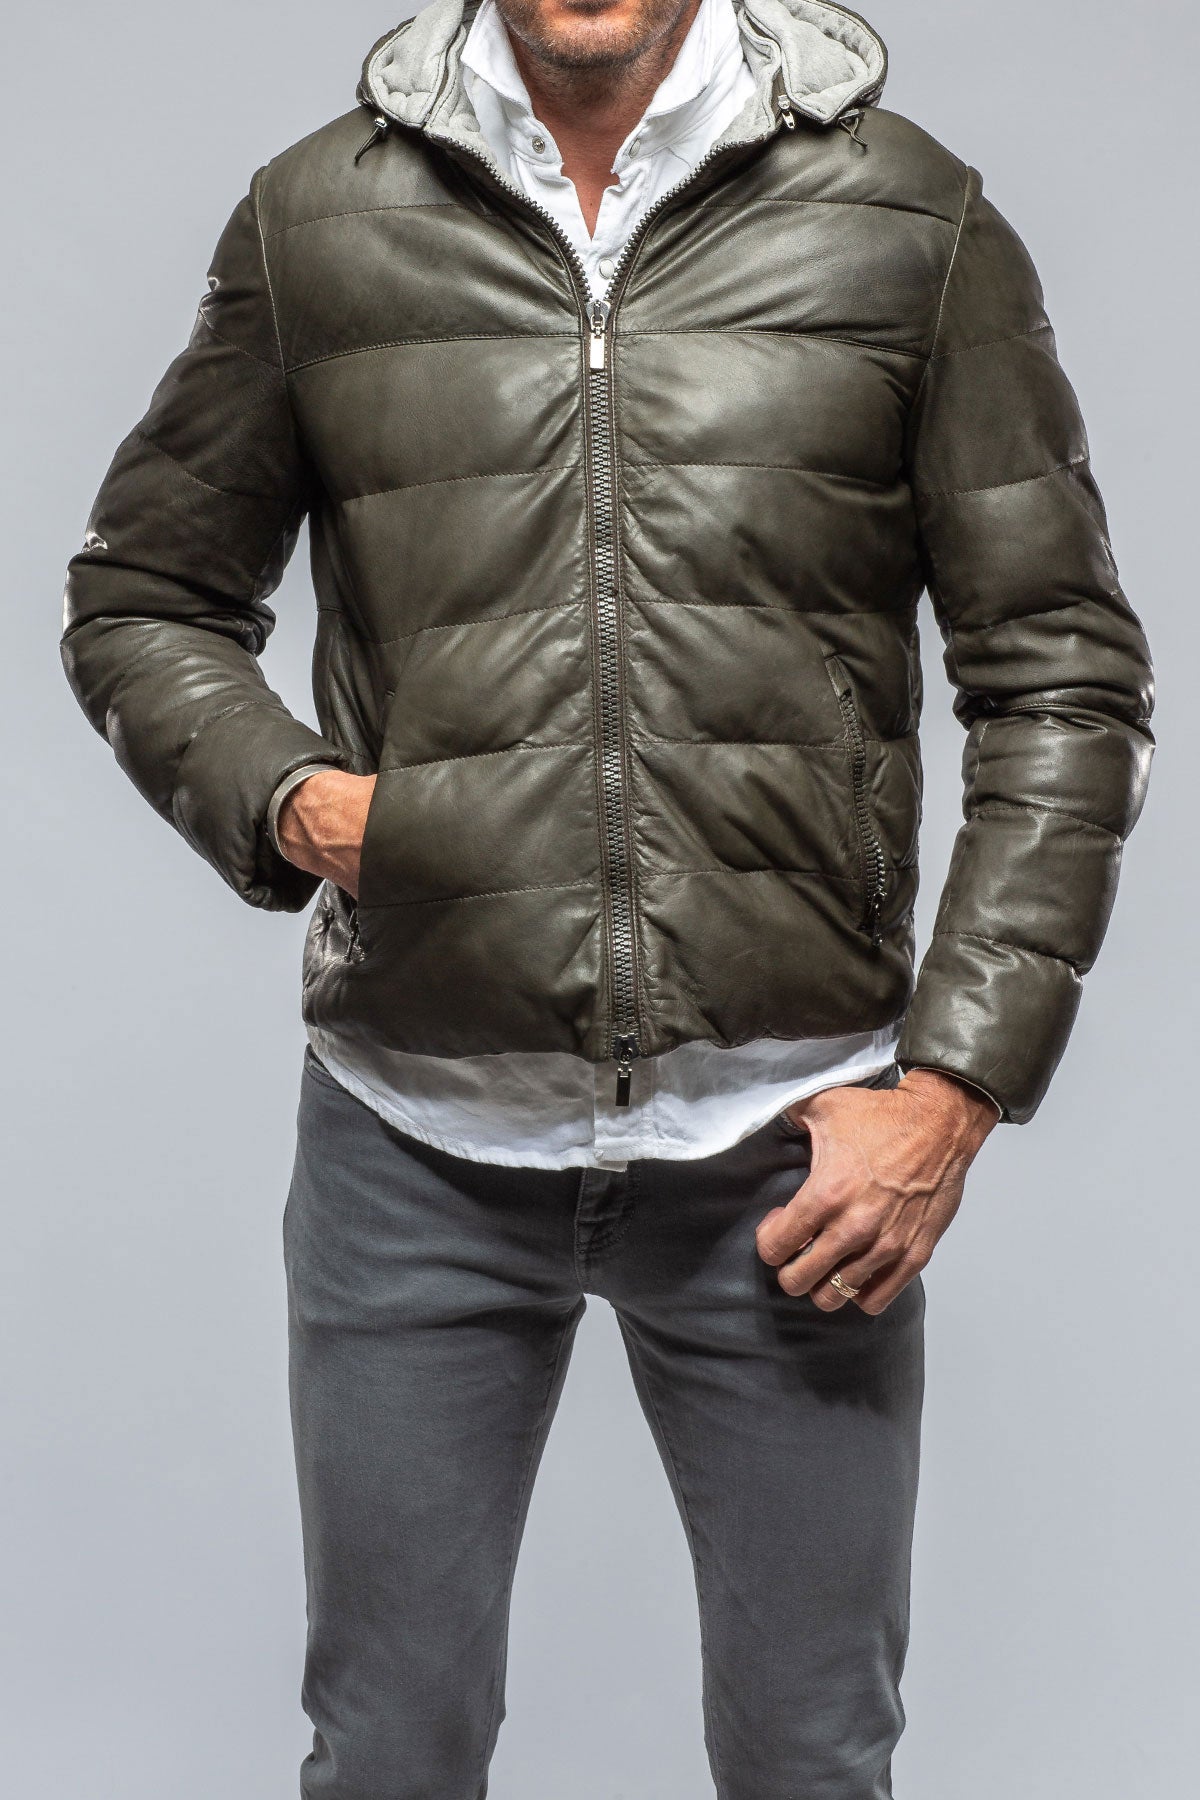 Classic Black Leather Puffer Jacket Mens - Stay Warm in Style!-  ChersDelights Leather Apparel